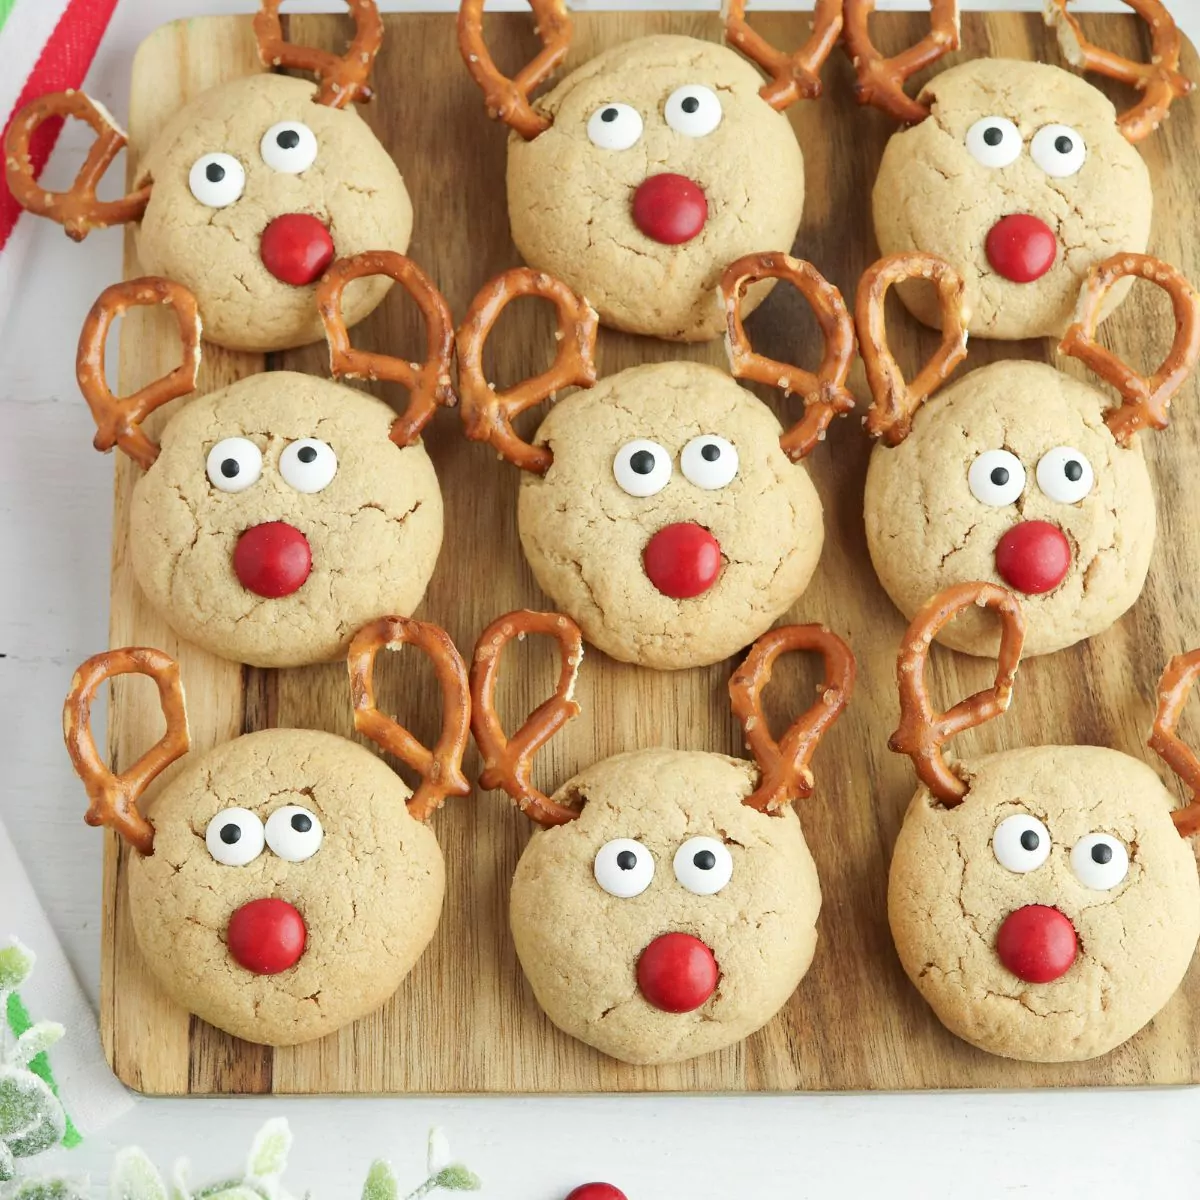 Peanut butter cookies decorated as reindeers with pretzel antlers.